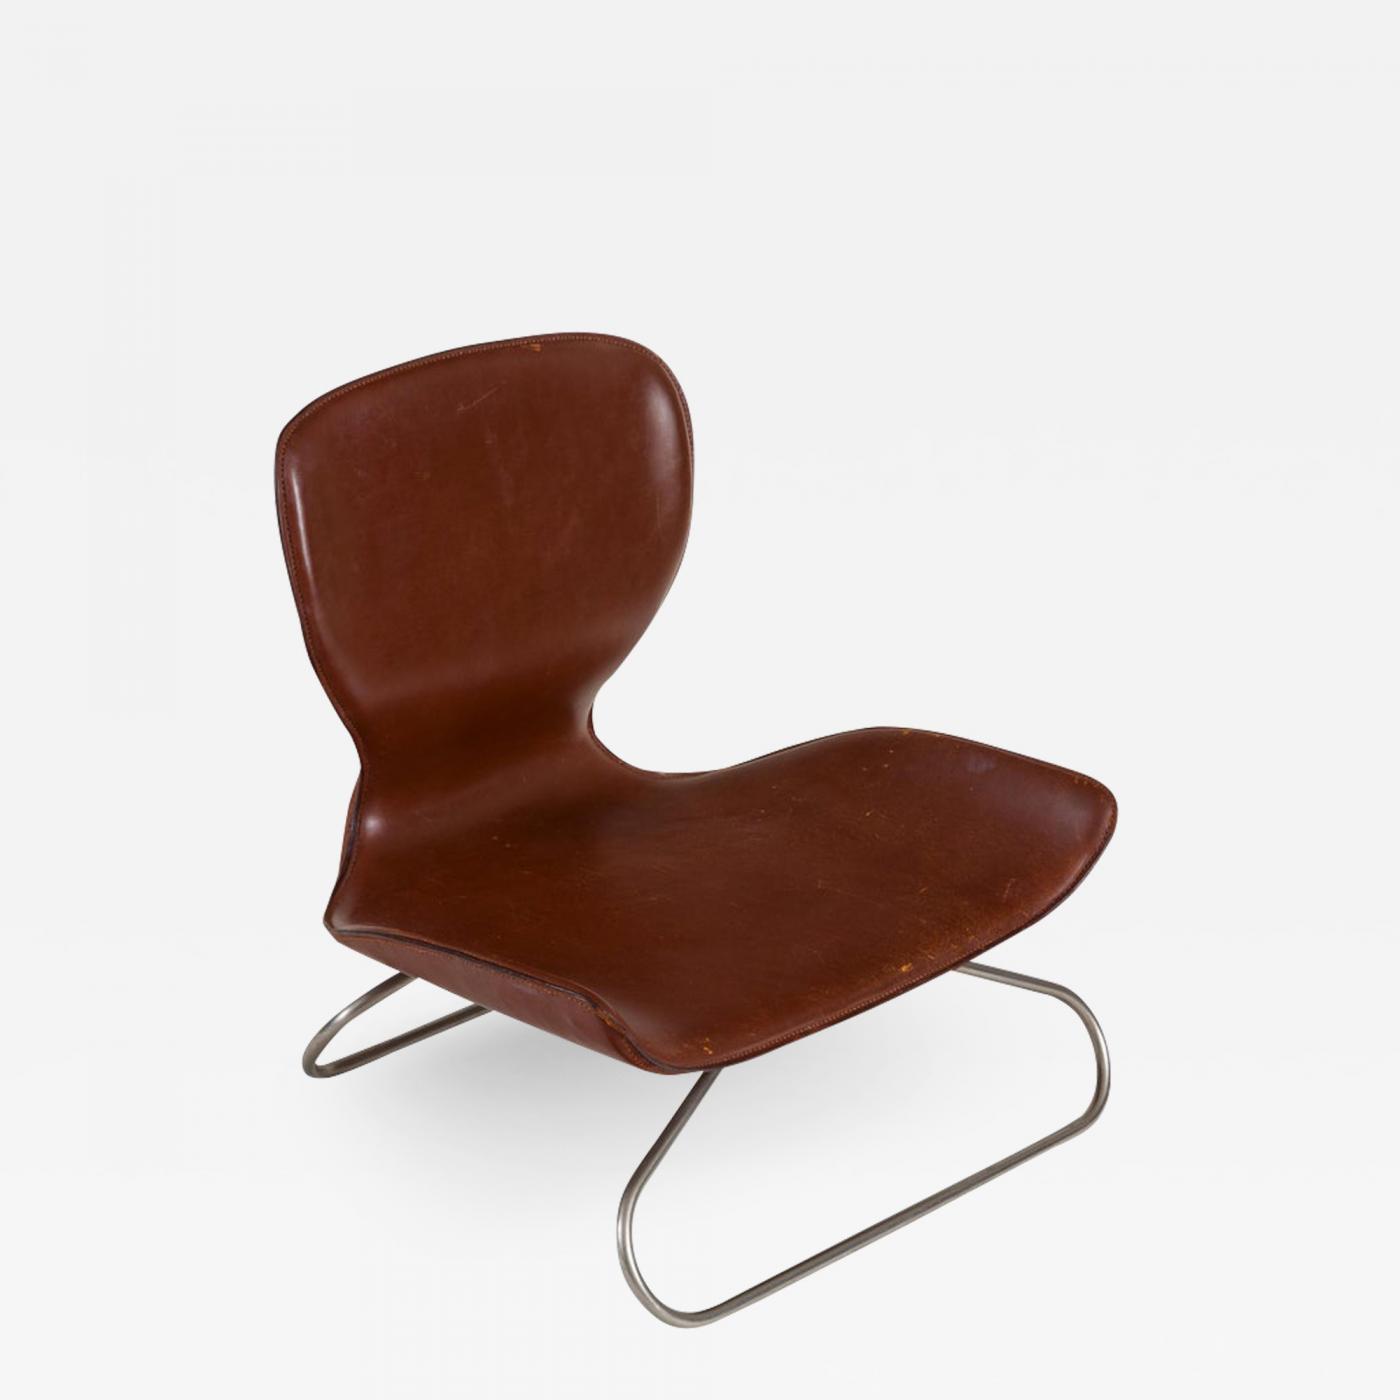 K 3 Low Leather Chair By Kirsten Jones, Low Leather Chair